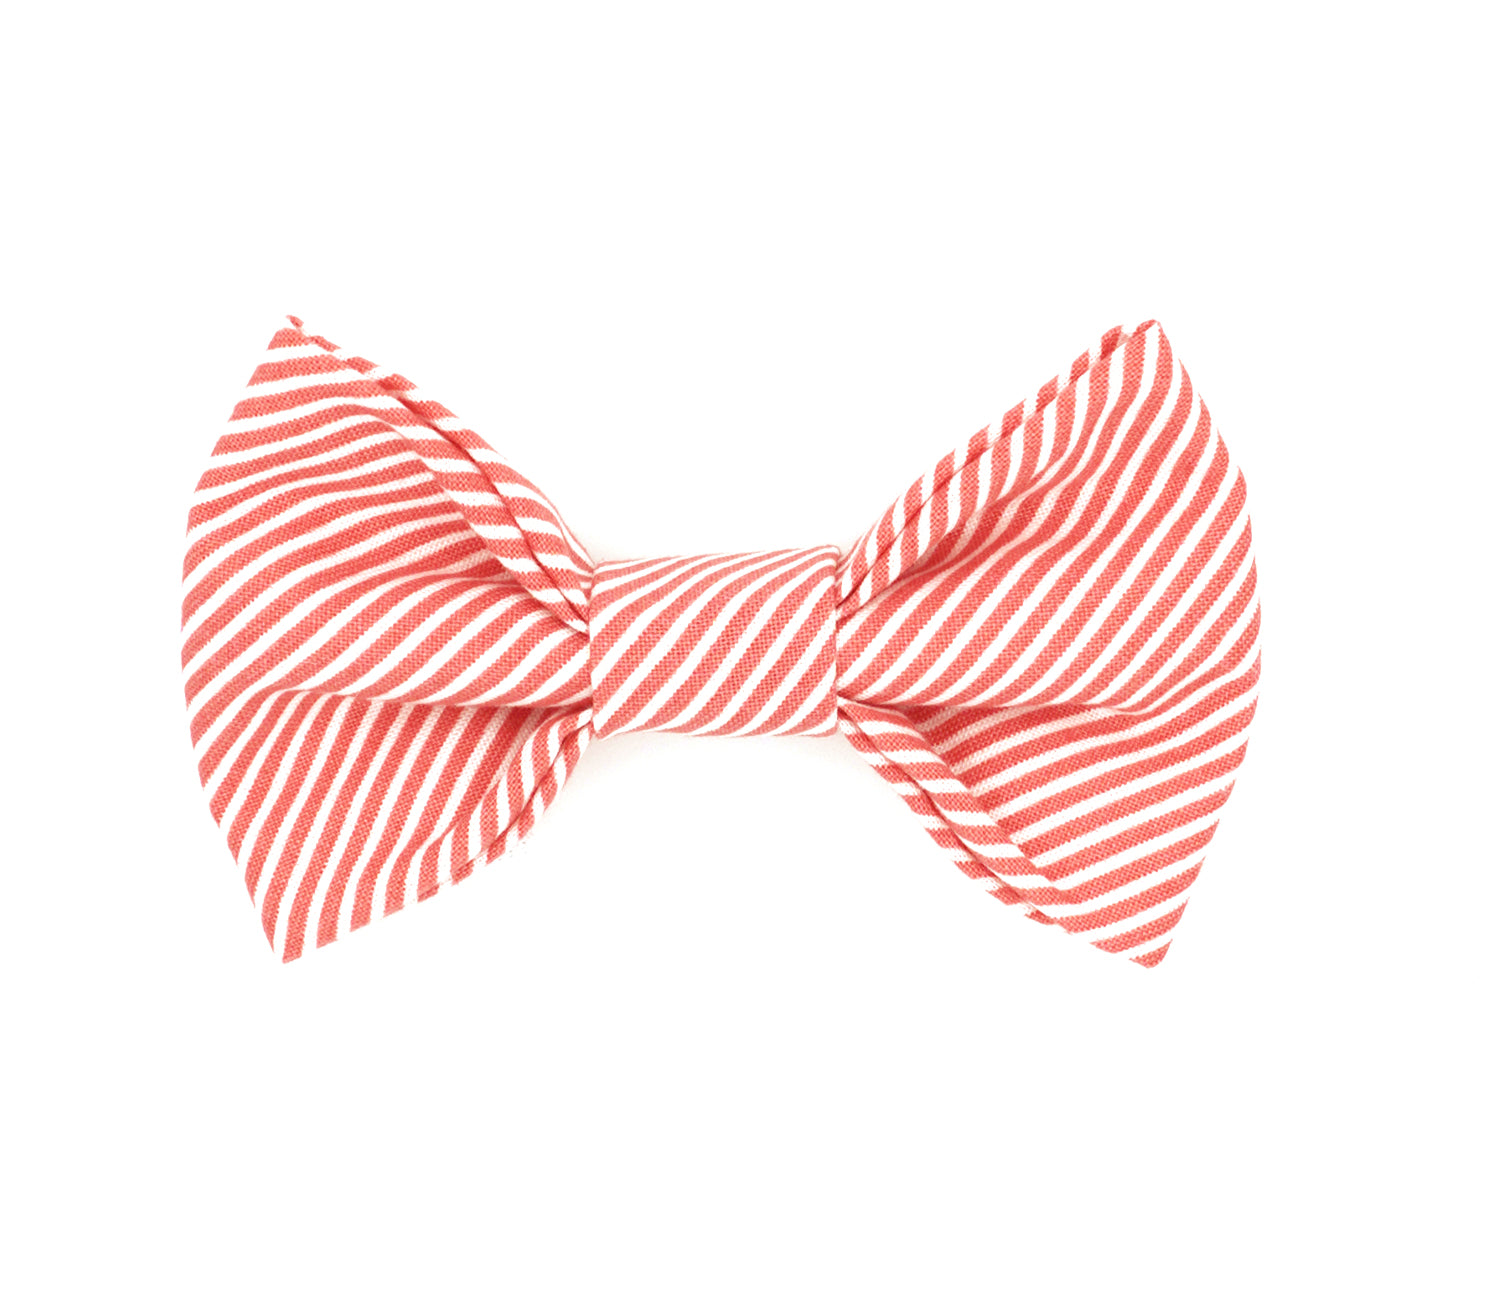 Handmade cotton bow tie for dogs (or other pets). Elastic straps on back with snaps make it easy to add to collar, harness, or leash. Coral and white stripes.